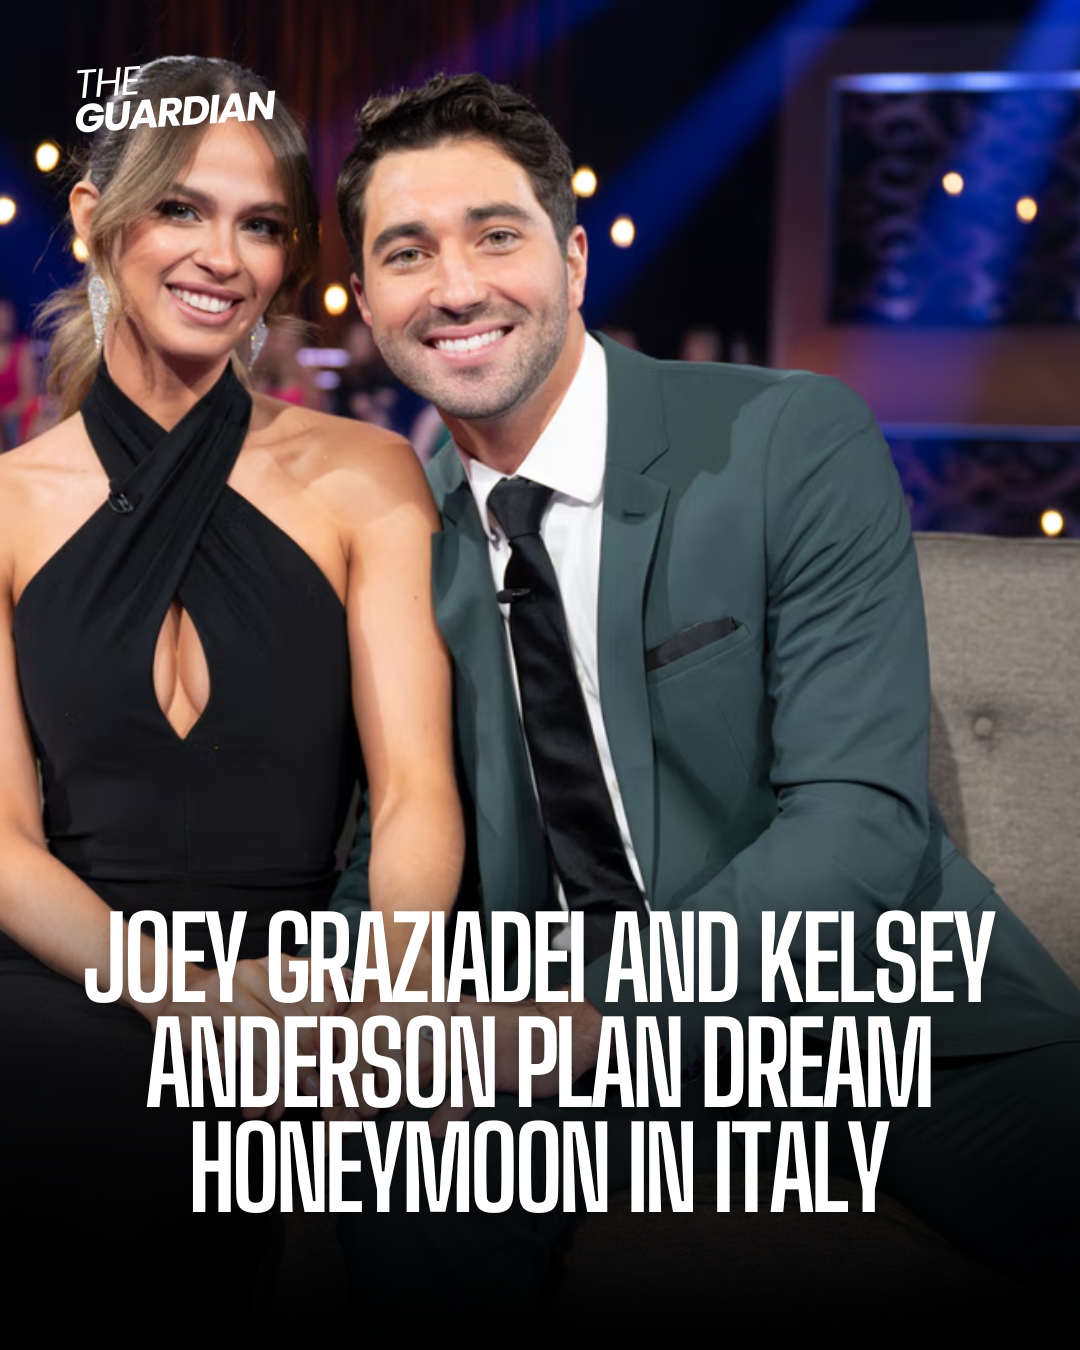 Joey Graziadei and Kelsey Anderson have said their preferred honeymoon destination is Italy.